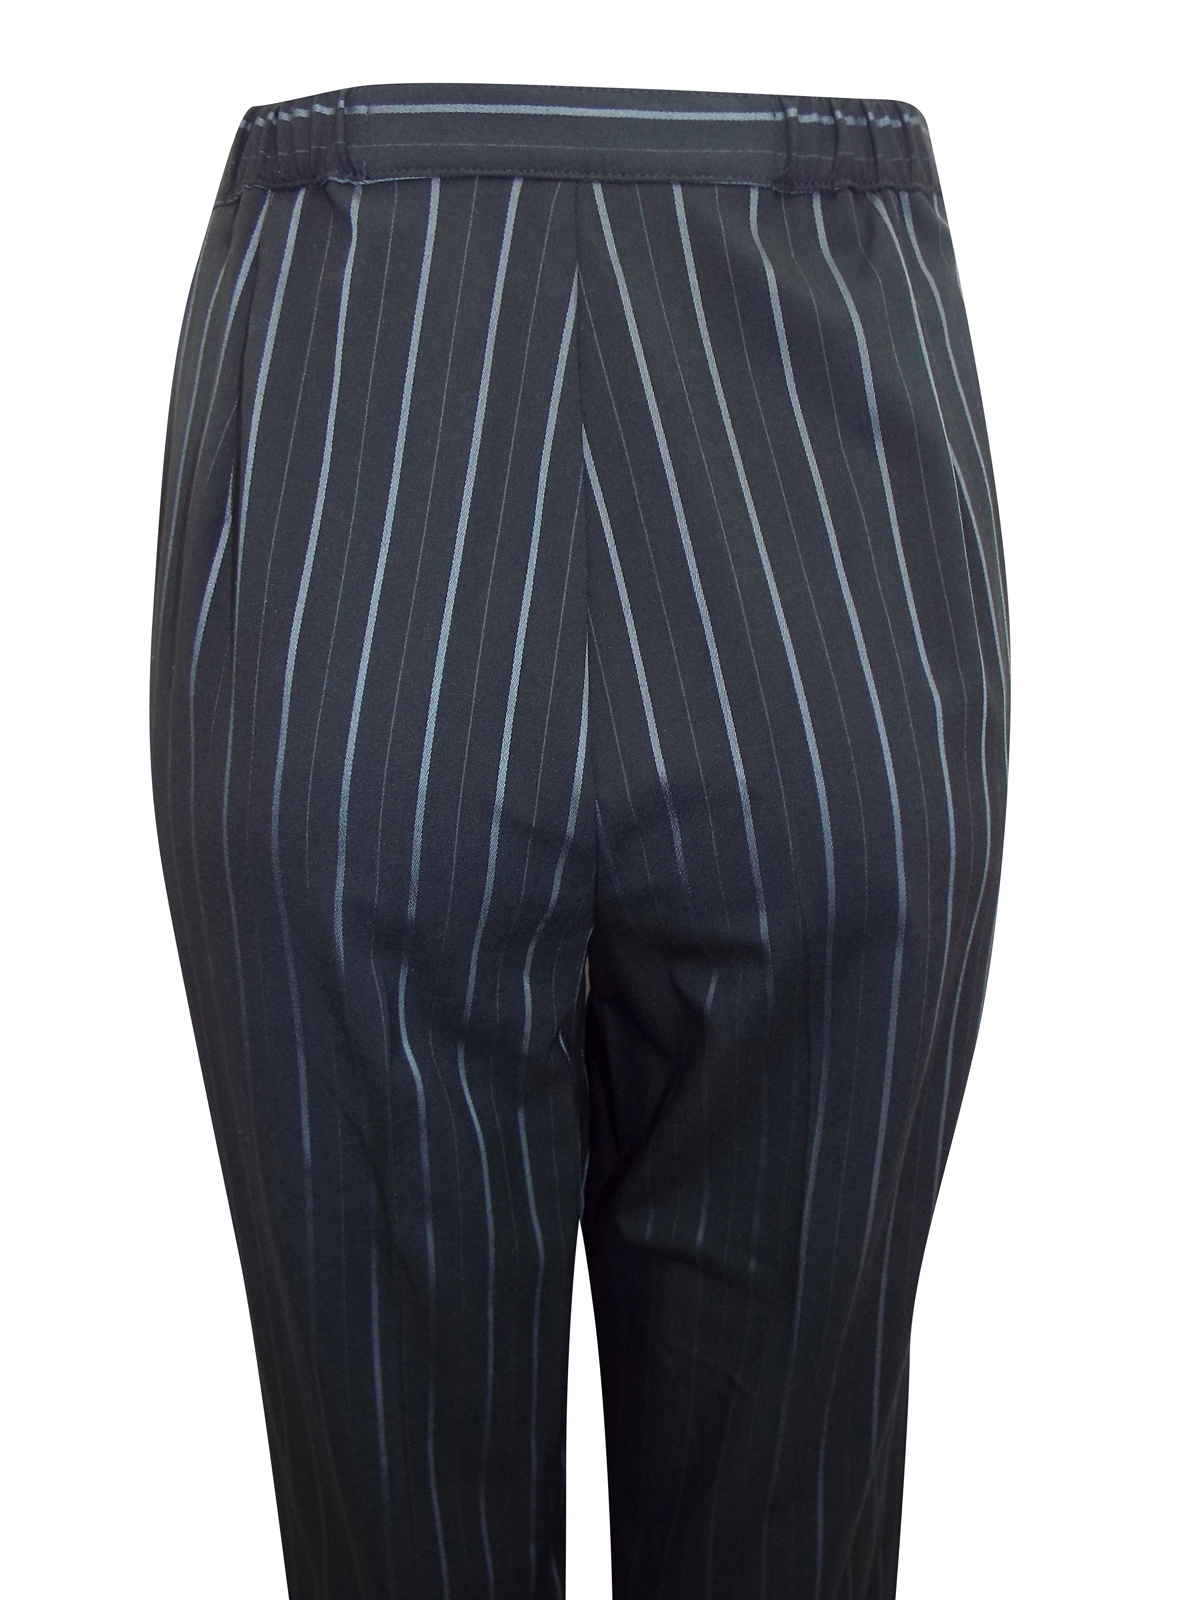 Marks and Spencer - - M&5 BLACK Straight Leg Pinstripe Trousers - Size ...